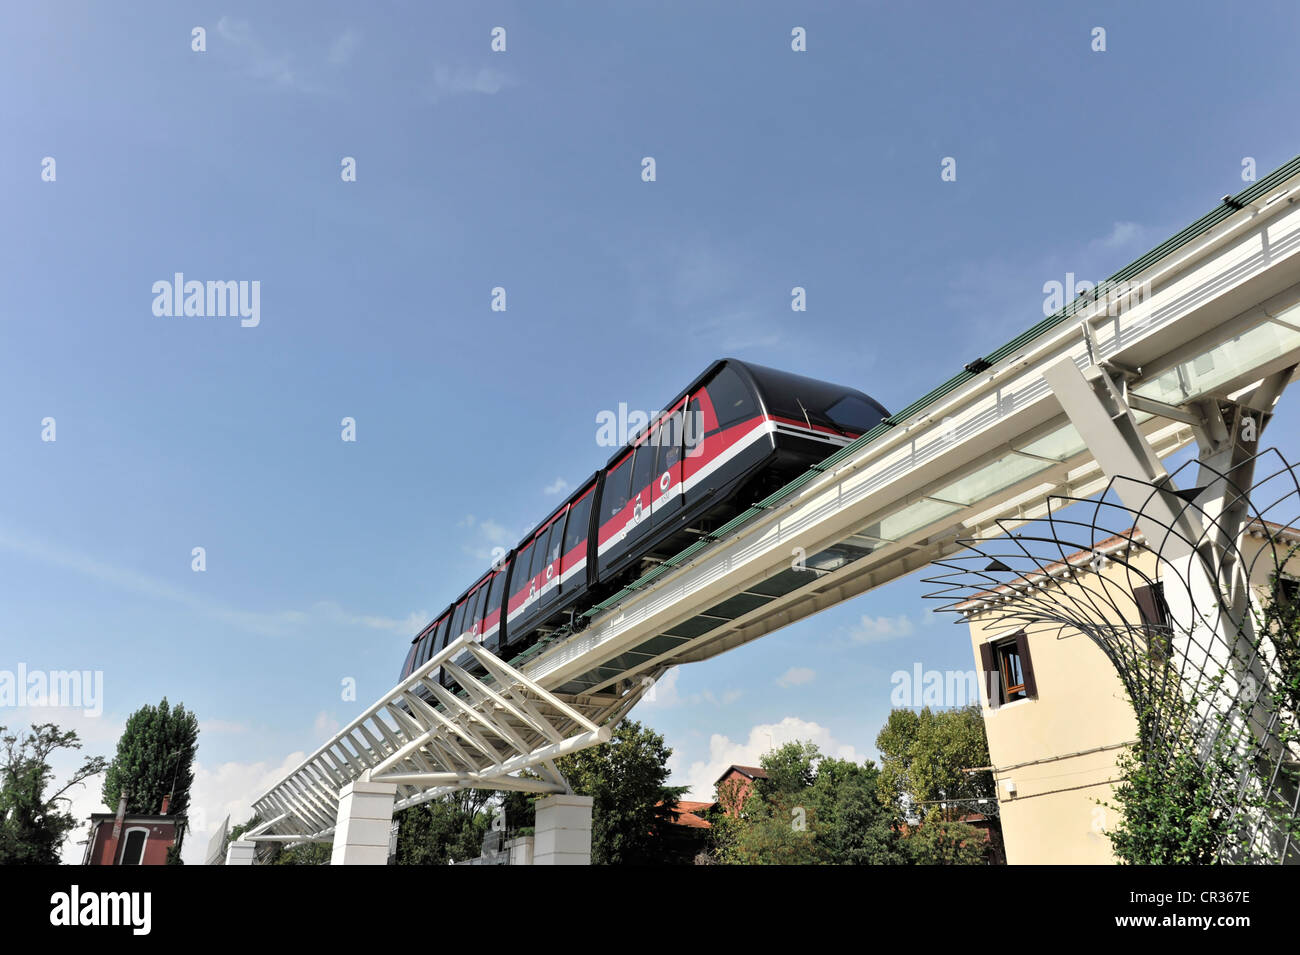 Venice People Mover, a new public transit system connecting the Tronchetto island with Piazzale Roma, Venice, Veneto region Stock Photo